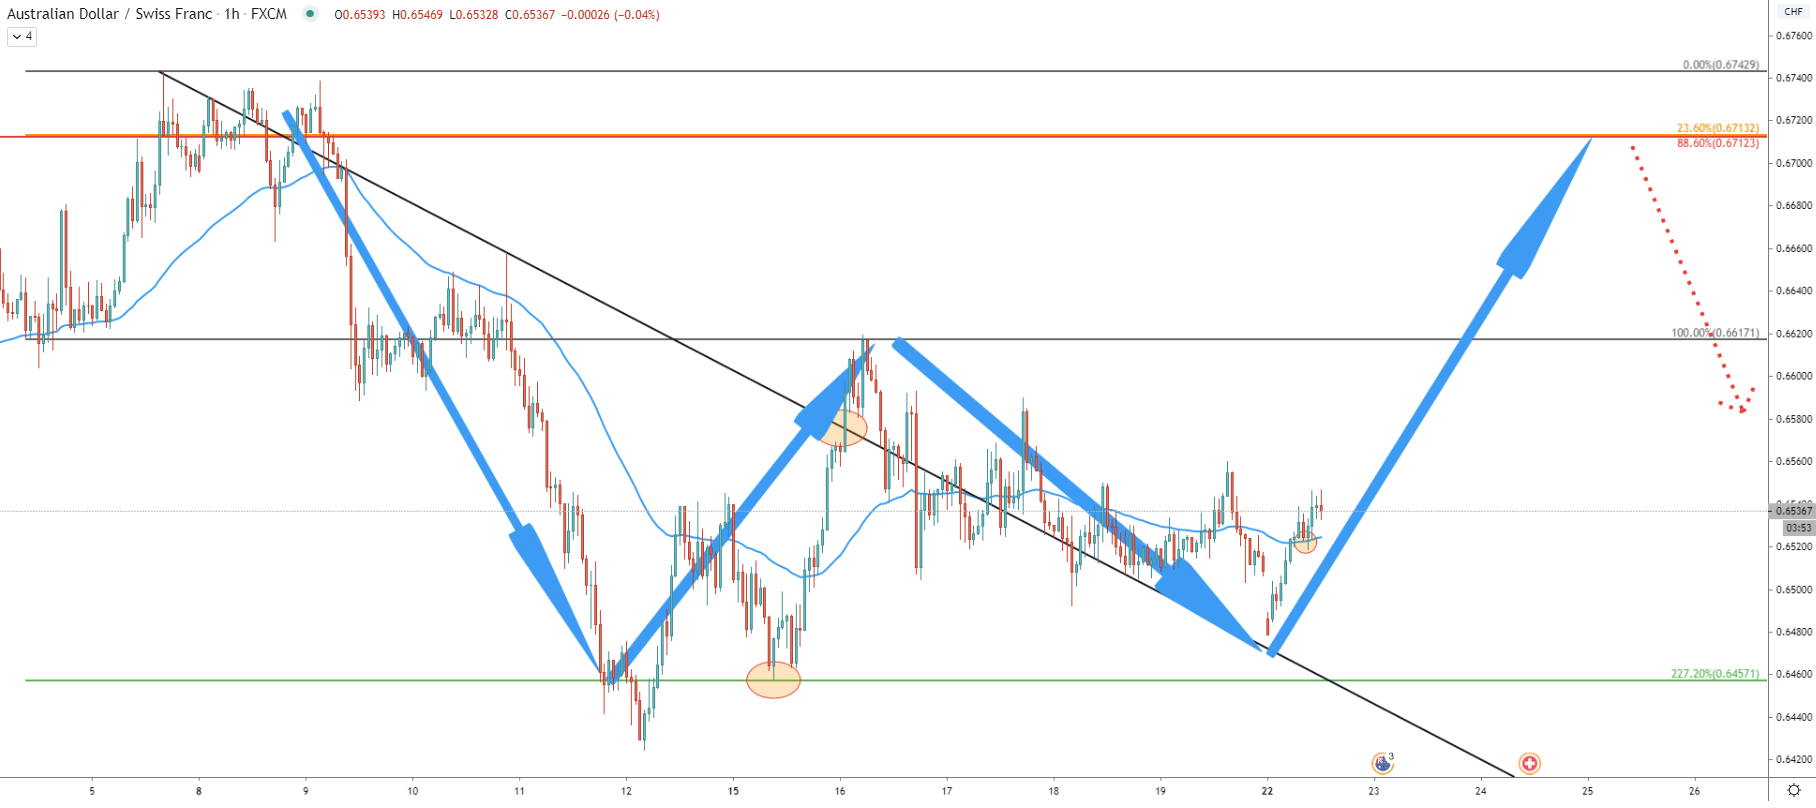 AUD/CHF 1-Hour Technical Analysis 22 June 2020